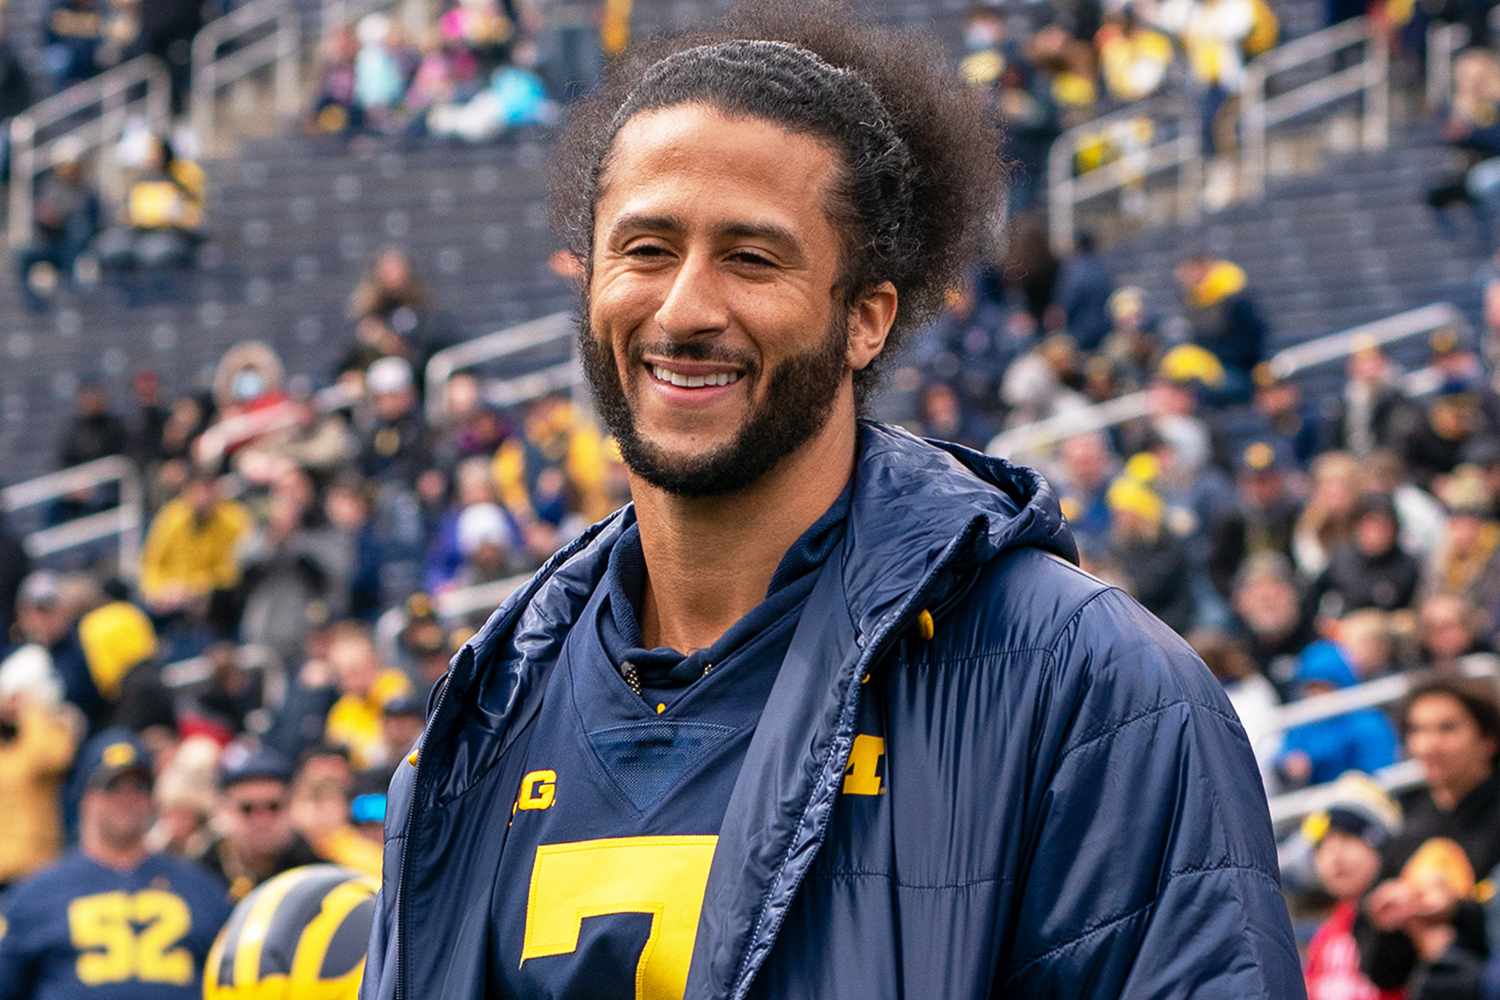 Colin Kaepernick waits to walk onto the field for the coin toss prior to the Michigan spring football game at Michigan Stadium on April 2, 2022 in Ann Arbor, Michigan. Kaepernick was honorary captain for the game.